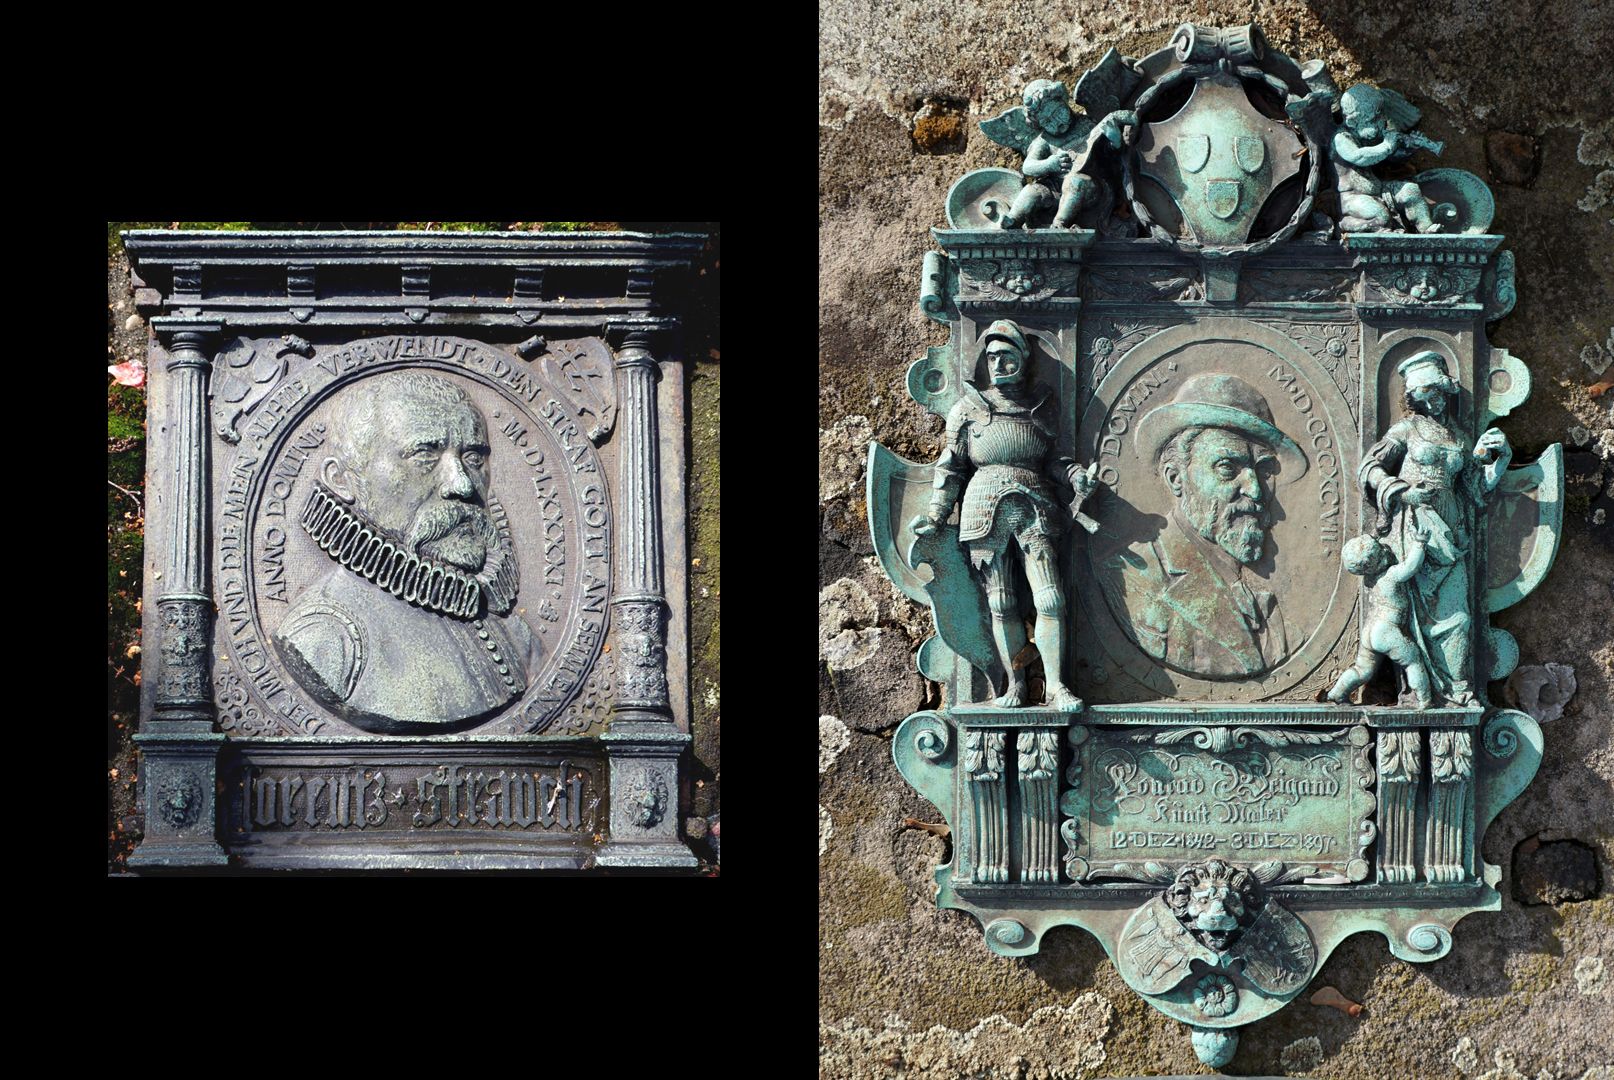 Epitaph of Konrad Weigand Picture comparison, left the epitaph of Lorenz Strauch (1591), right the epitaph of Korad Weigand (1897)